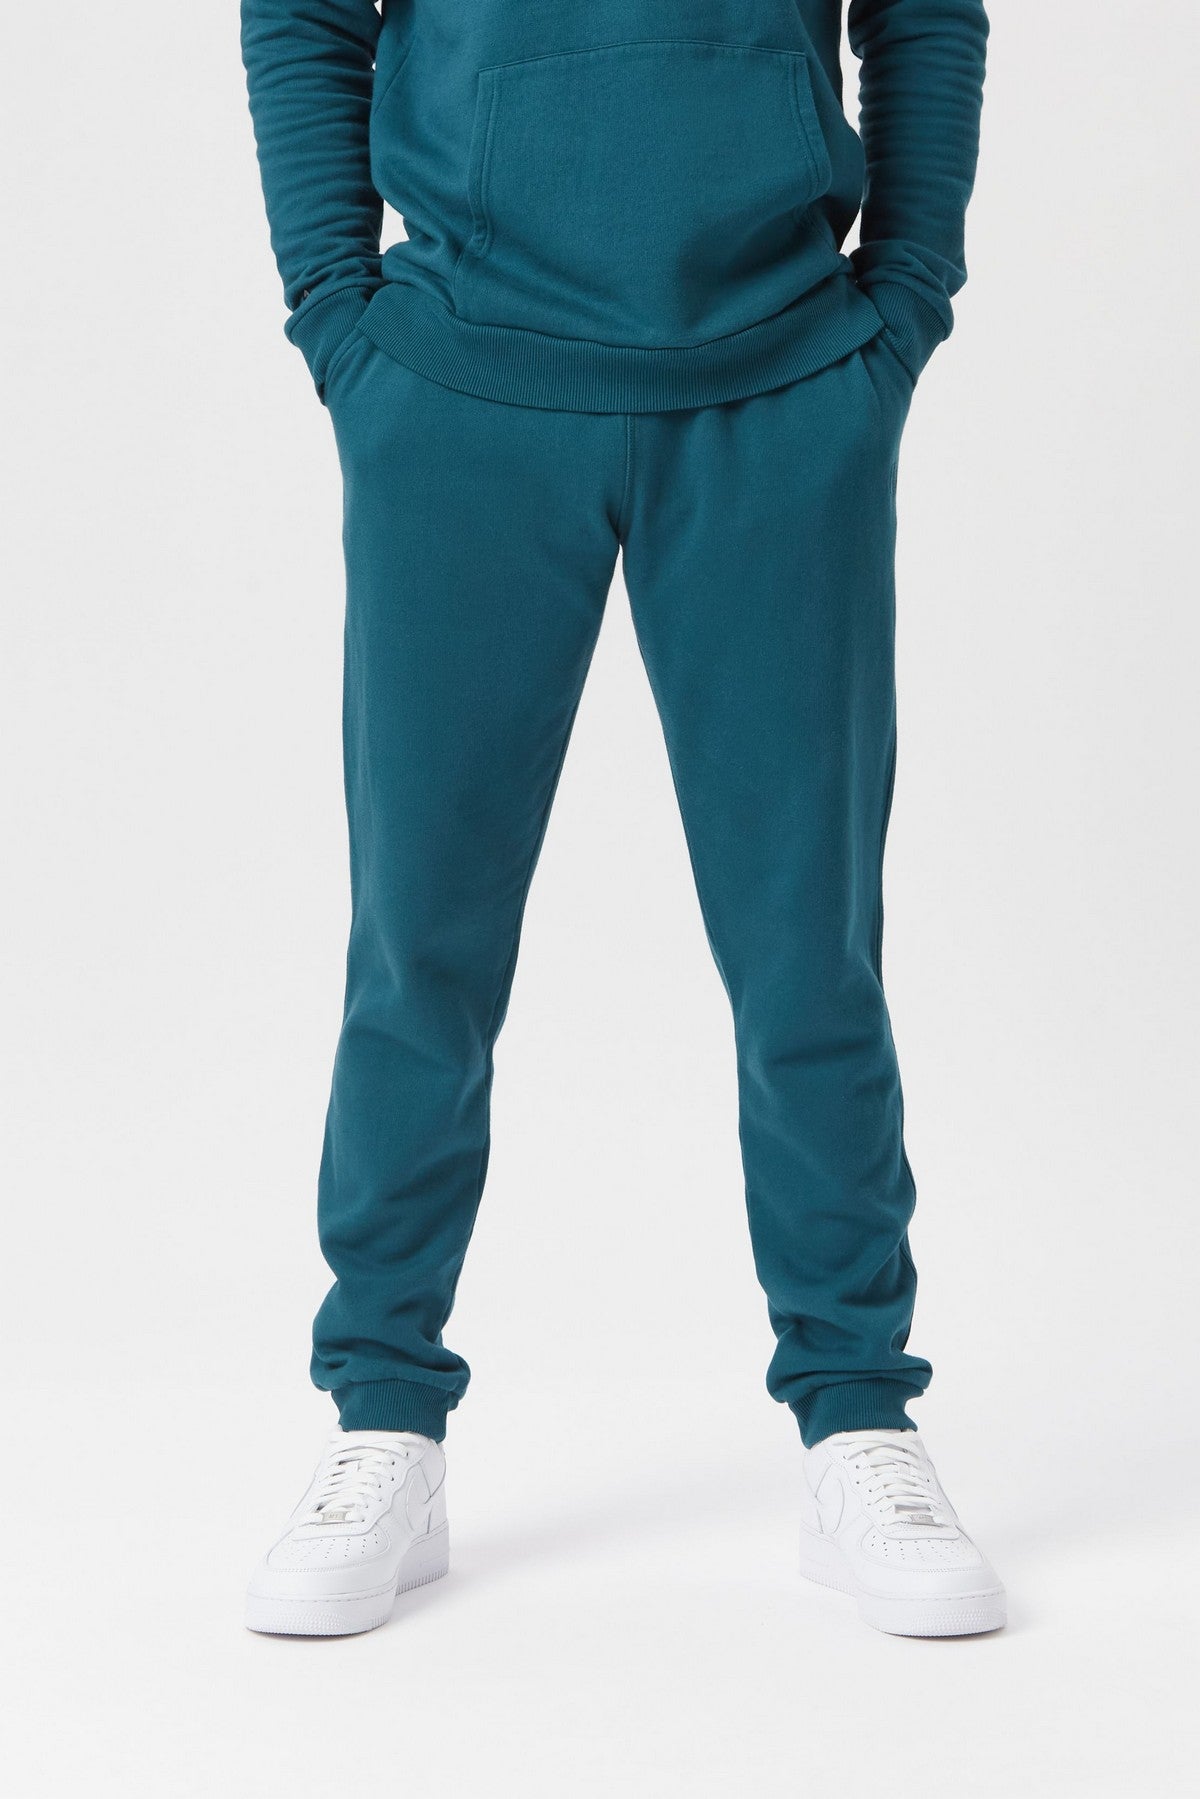 MAJI 'G' COLLECTION JOGGERS - DEEP TEAL - THAT GORILLA BRAND